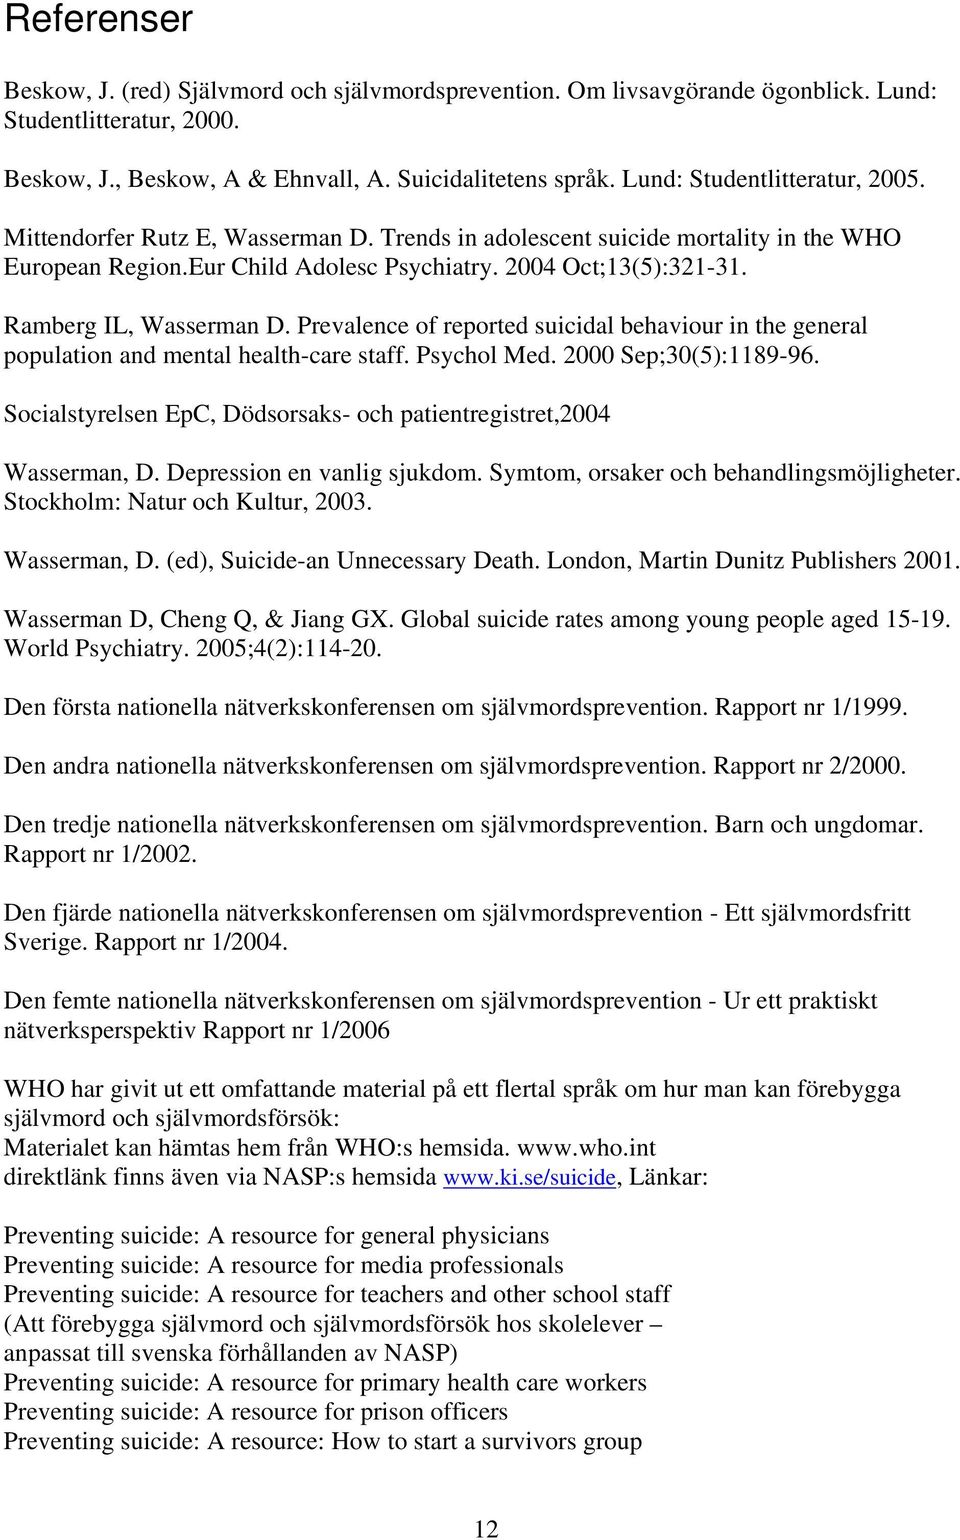 Ramberg IL, Wasserman D. Prevalence of reported suicidal behaviour in the general population and mental health-care staff. Psychol Med. 2000 Sep;30(5):1189-96.